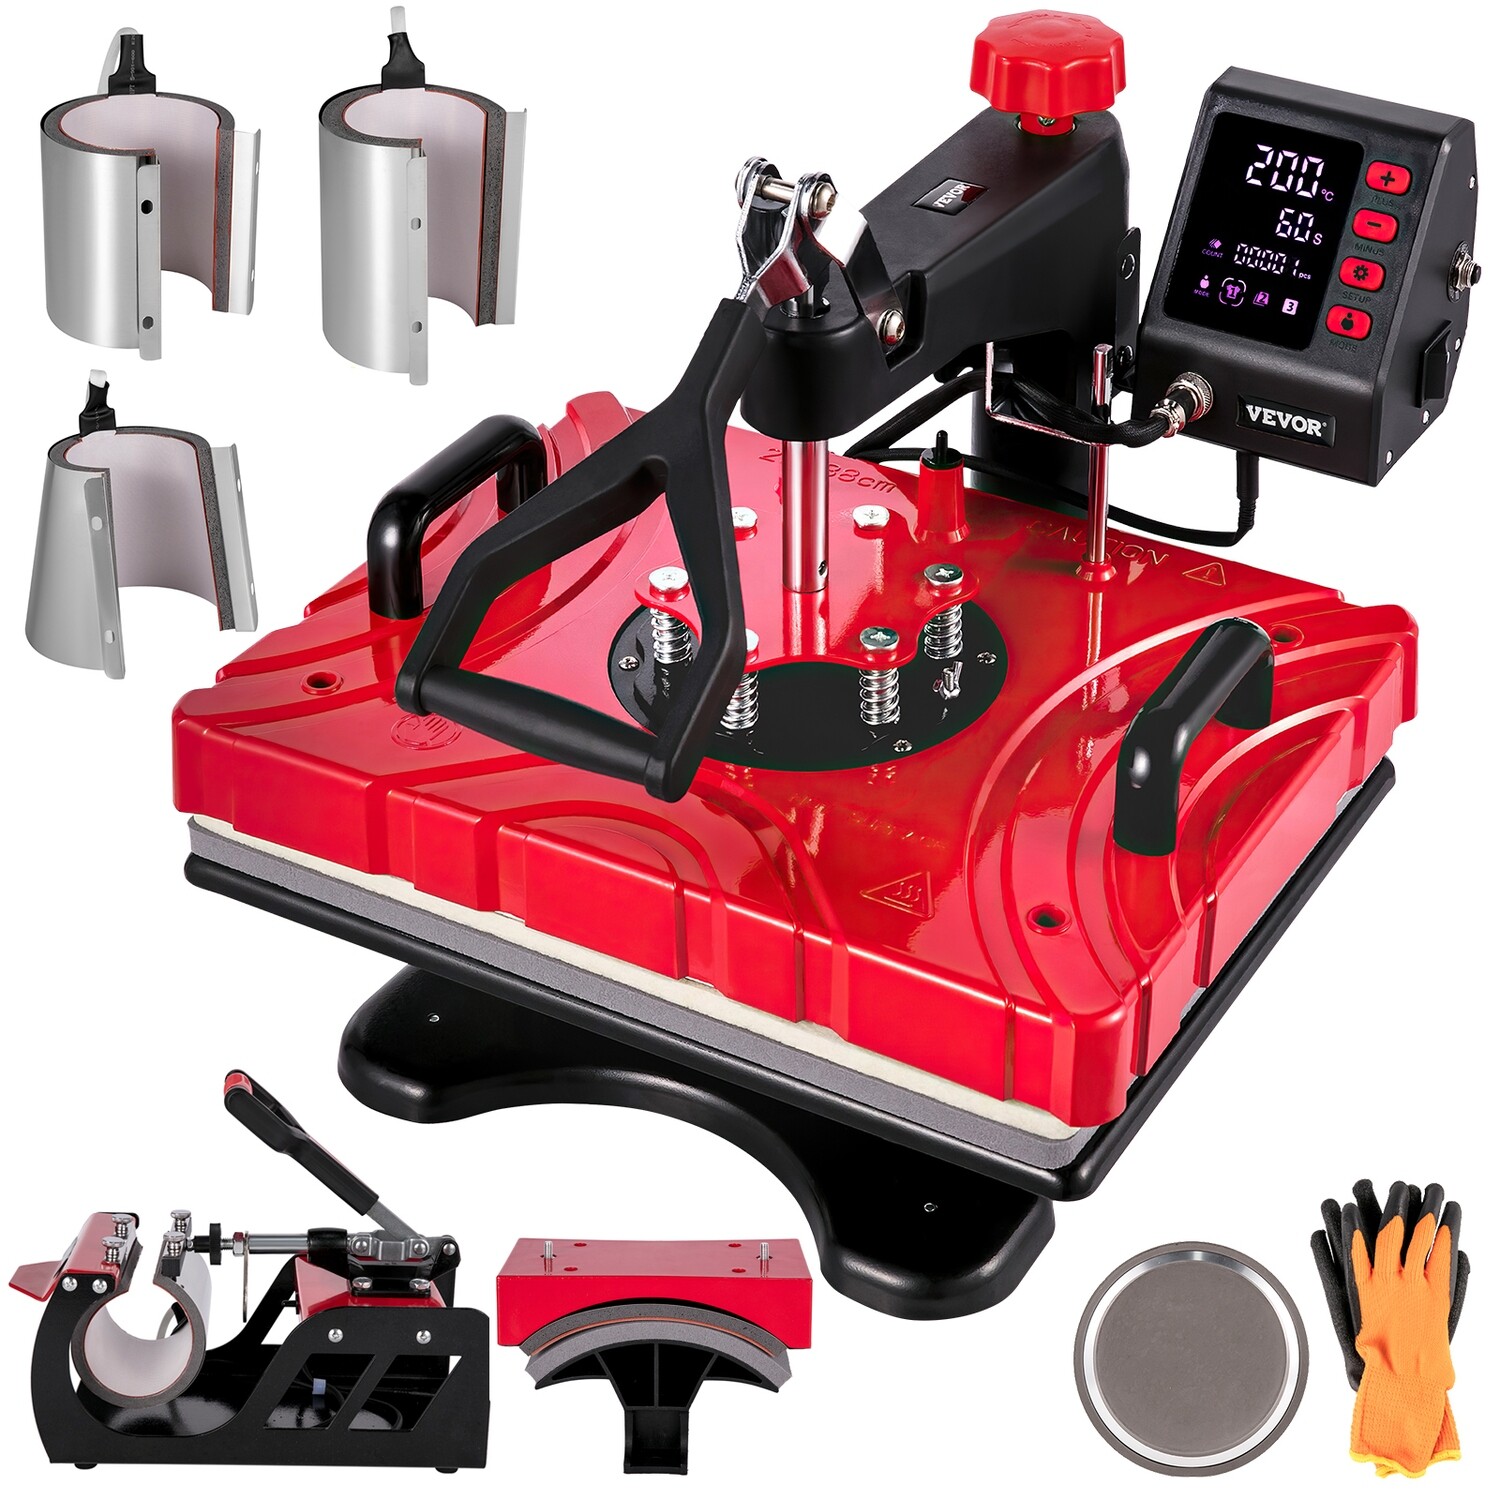 Heat Press 12x15 Red Sublimation Machine For Caps And Mugs, 8 In 1 Heat Press